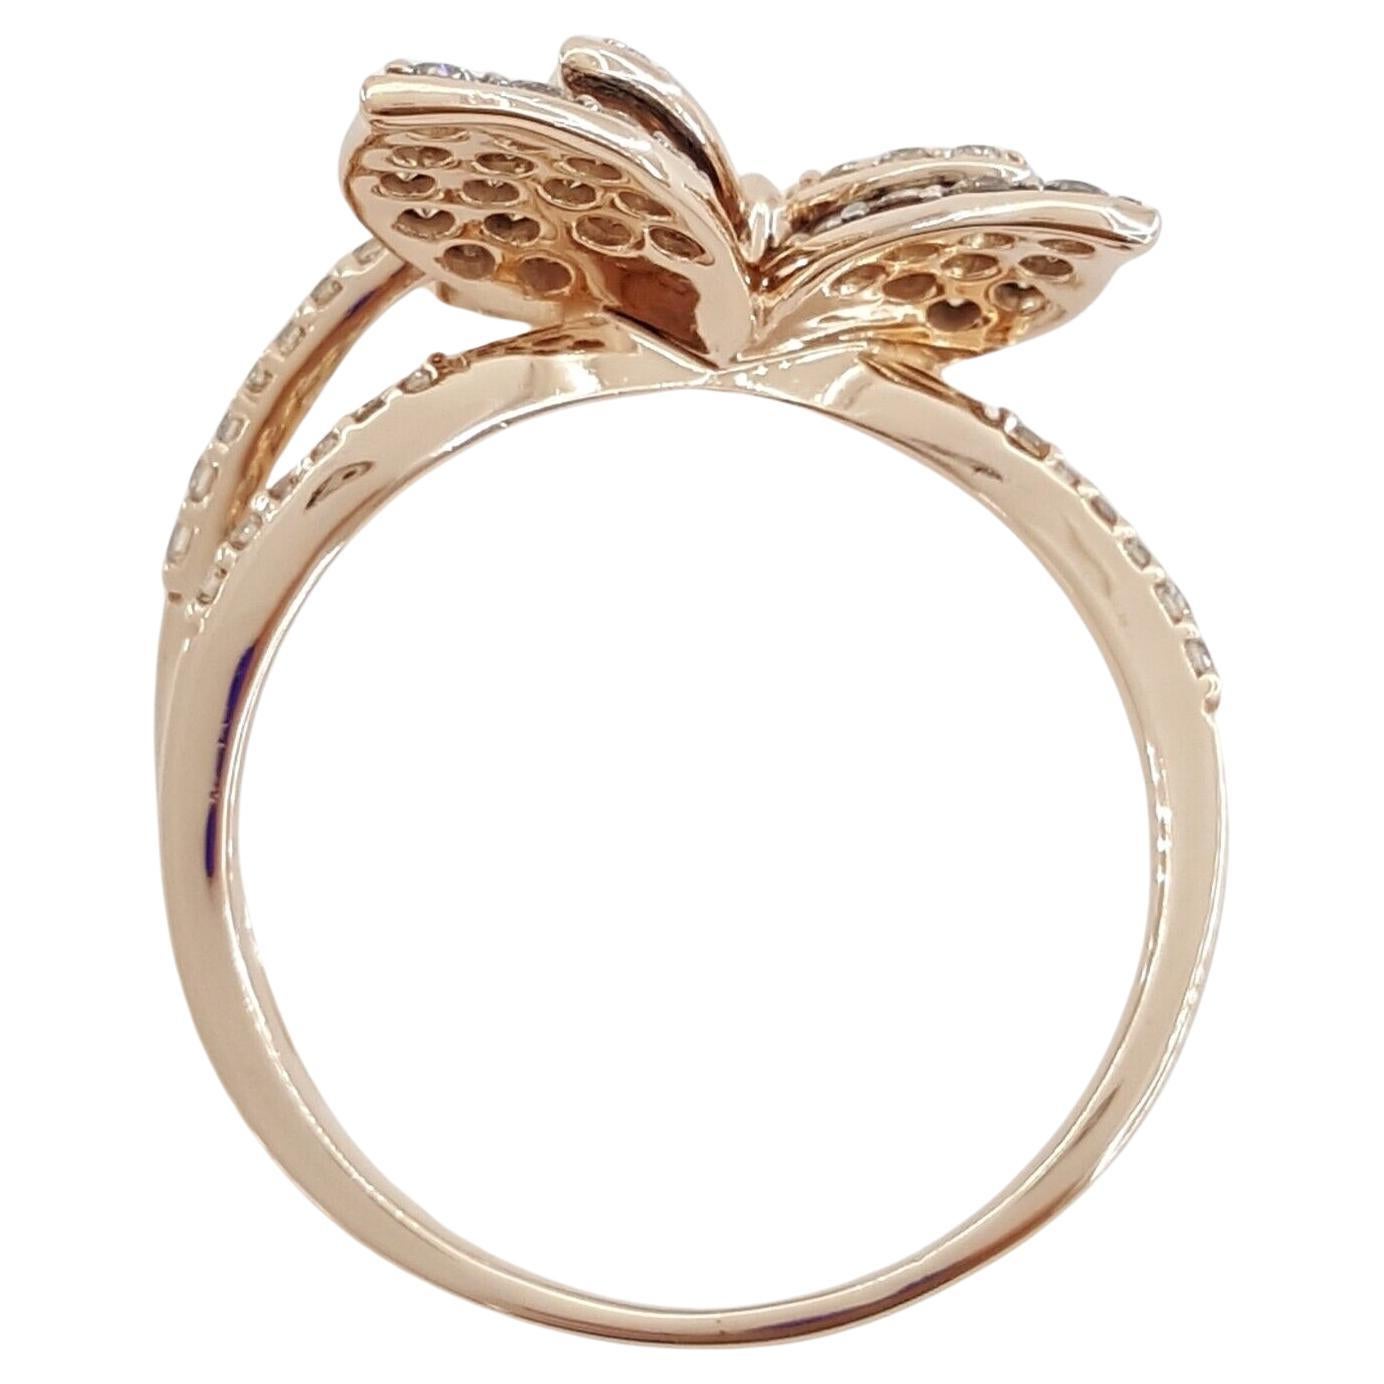 Butterfly Engagement / Statement Ring in 14K Rose/Strawberry Gold.



The ring weighs 4.8 grams, size 9, there are 32 Natural Round Brilliant Cut Chocolate & 35 Natural Nude Round Brilliant Diamonds weighing approximately 1 ct total weight,